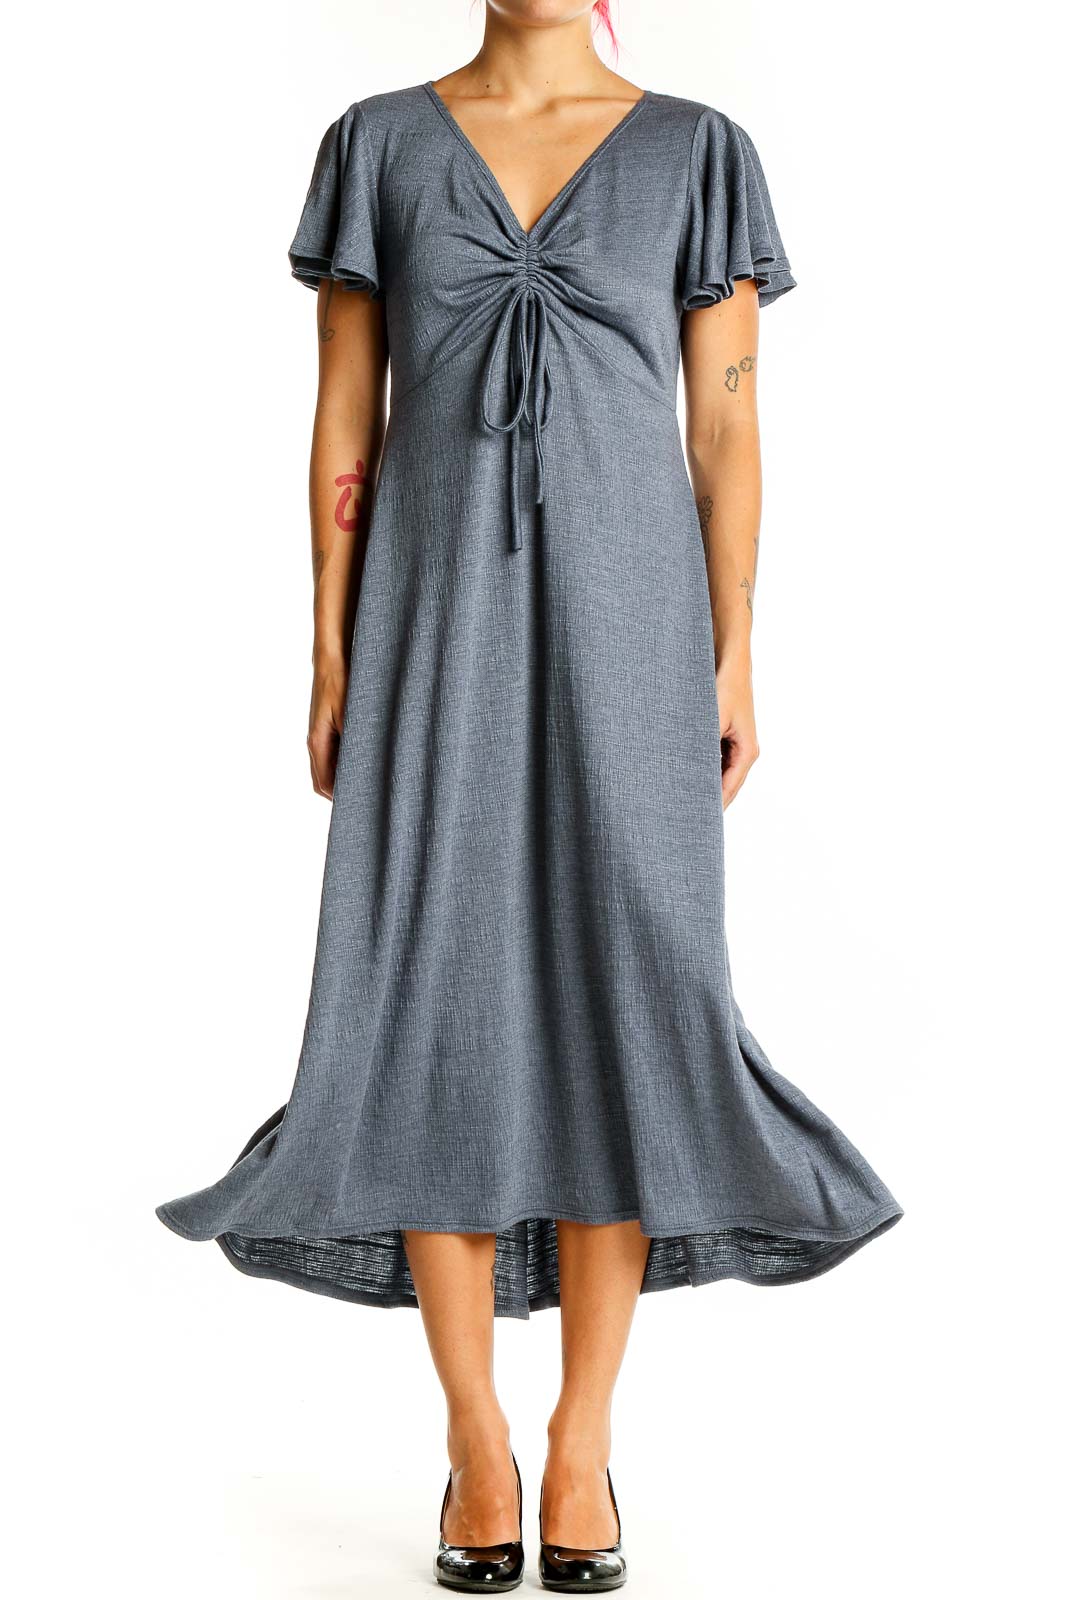 Grey Wrap All Day Wear Classic Solid Dress Front